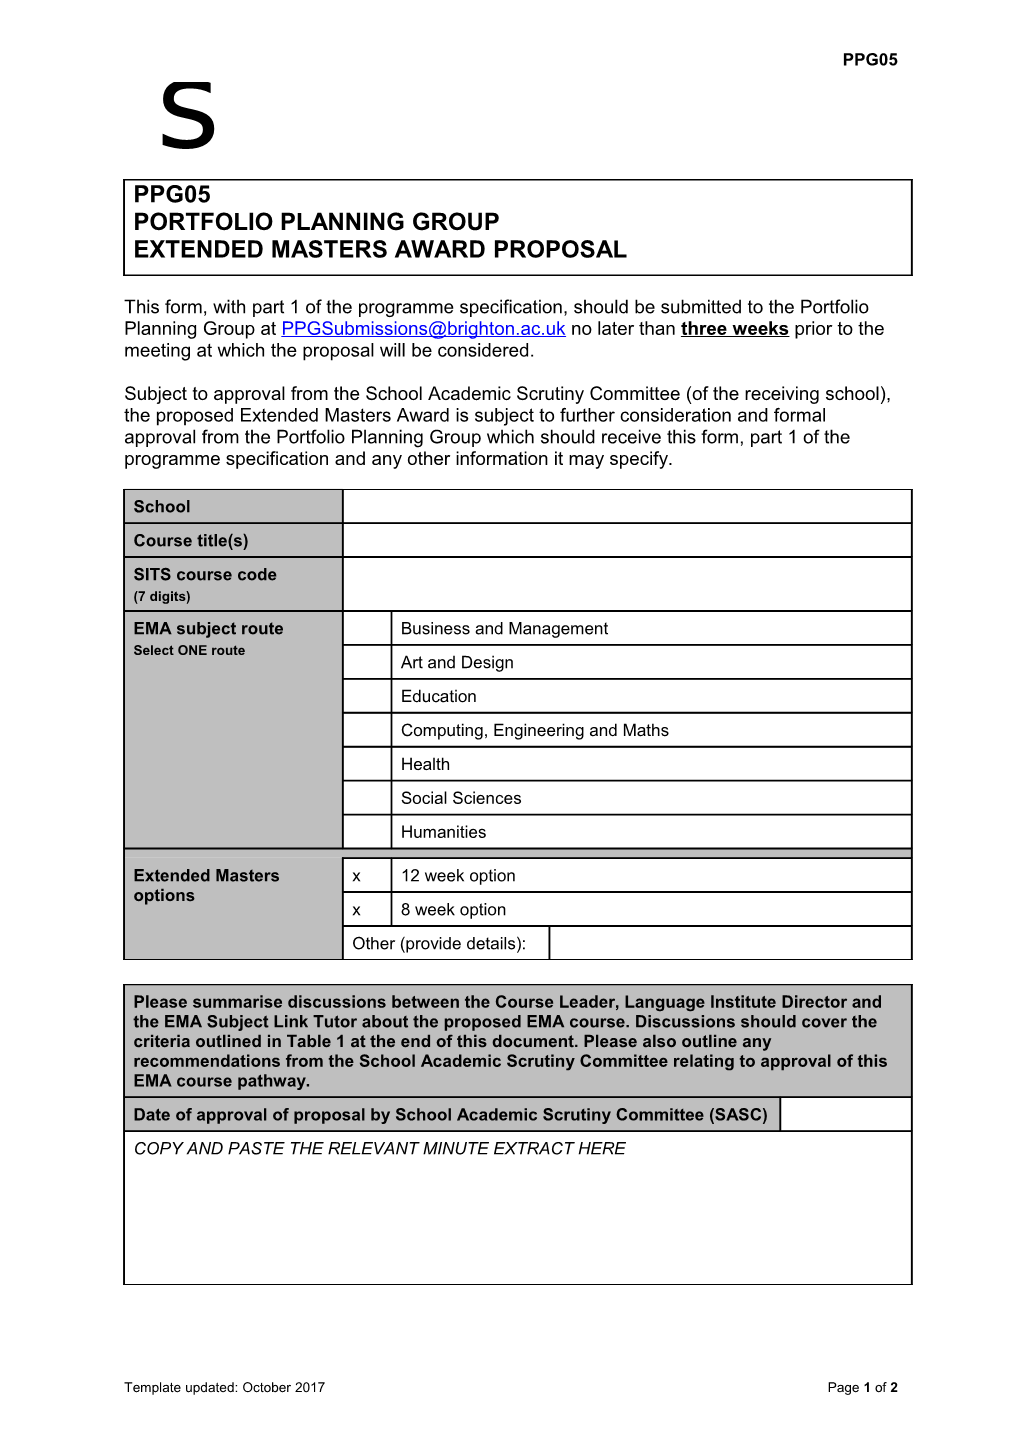 PPG05 - Extended Masters Award (EMA) Proposal